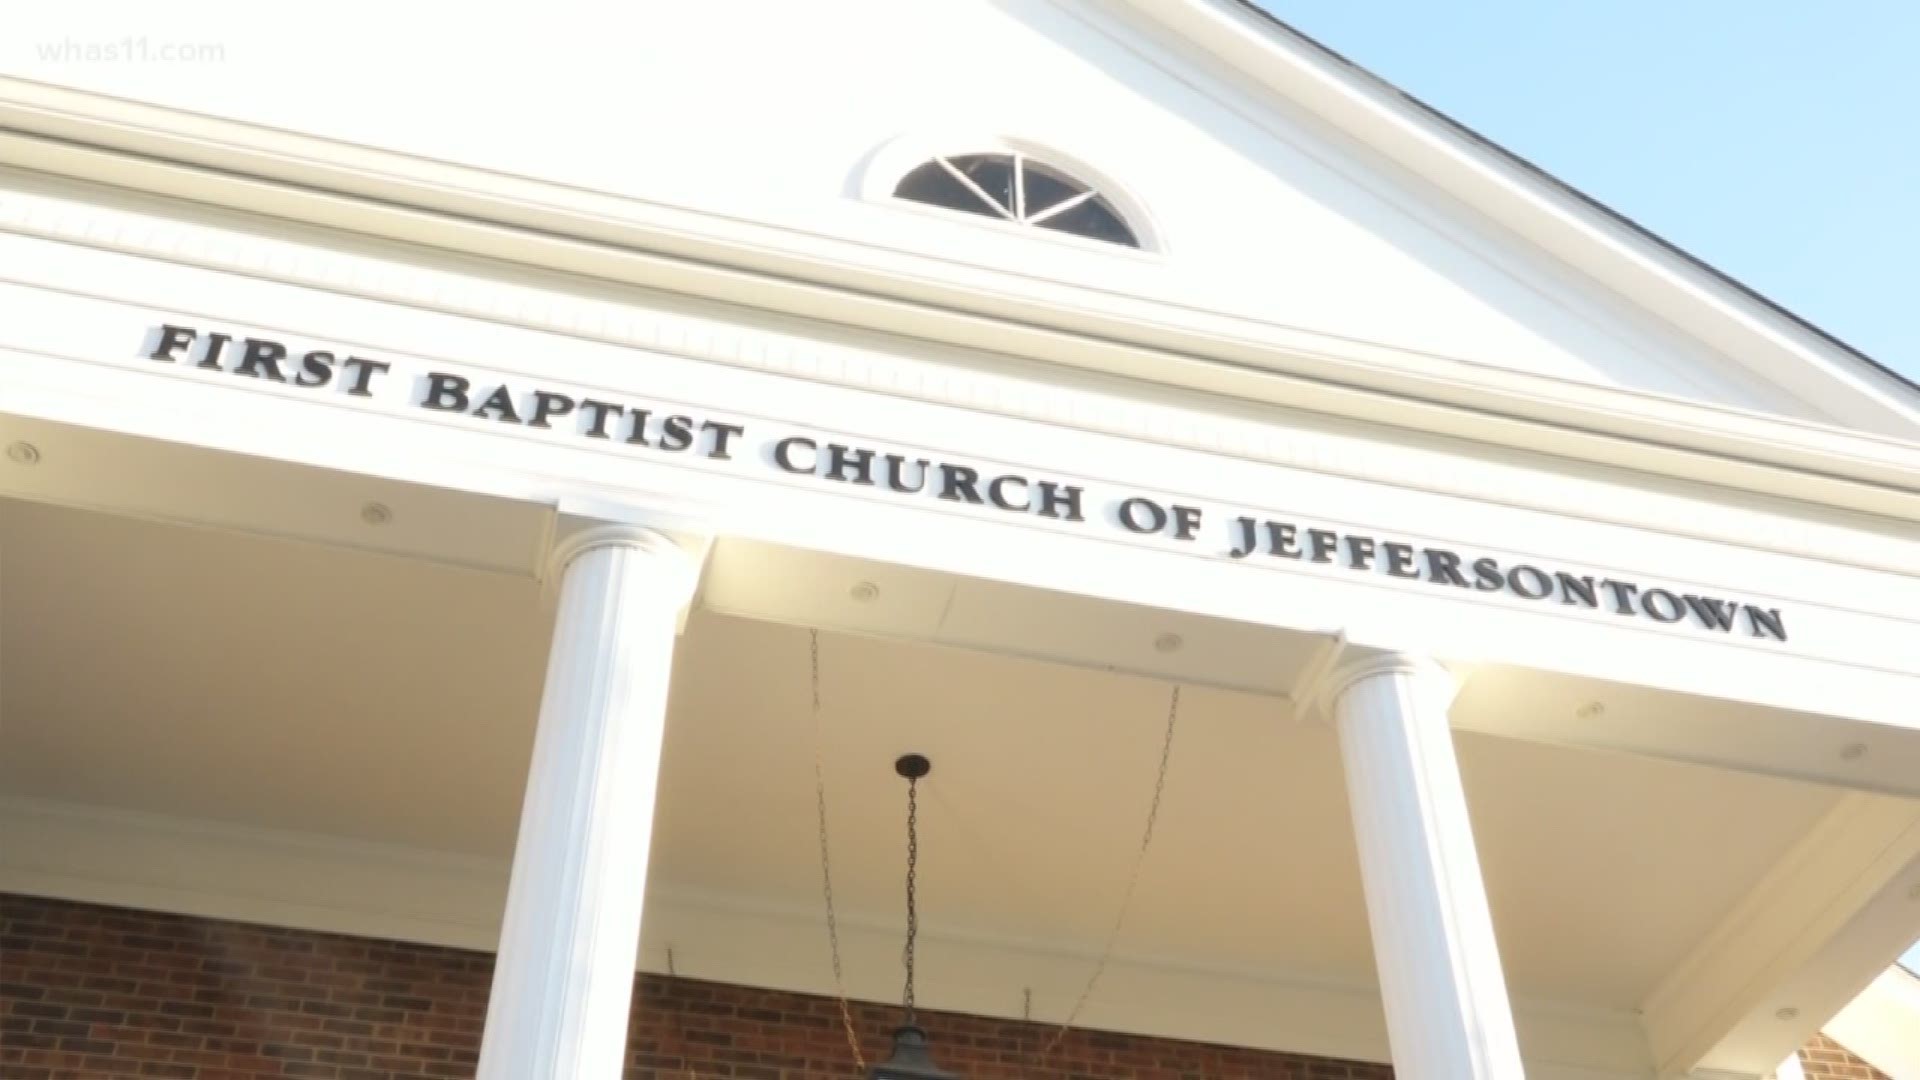 First Baptist is making changes to increase the safety behind its doors. According to The Washington Post, it's now encouraging its members with concealed carry permits to bring them inside the church during services and bible studies.